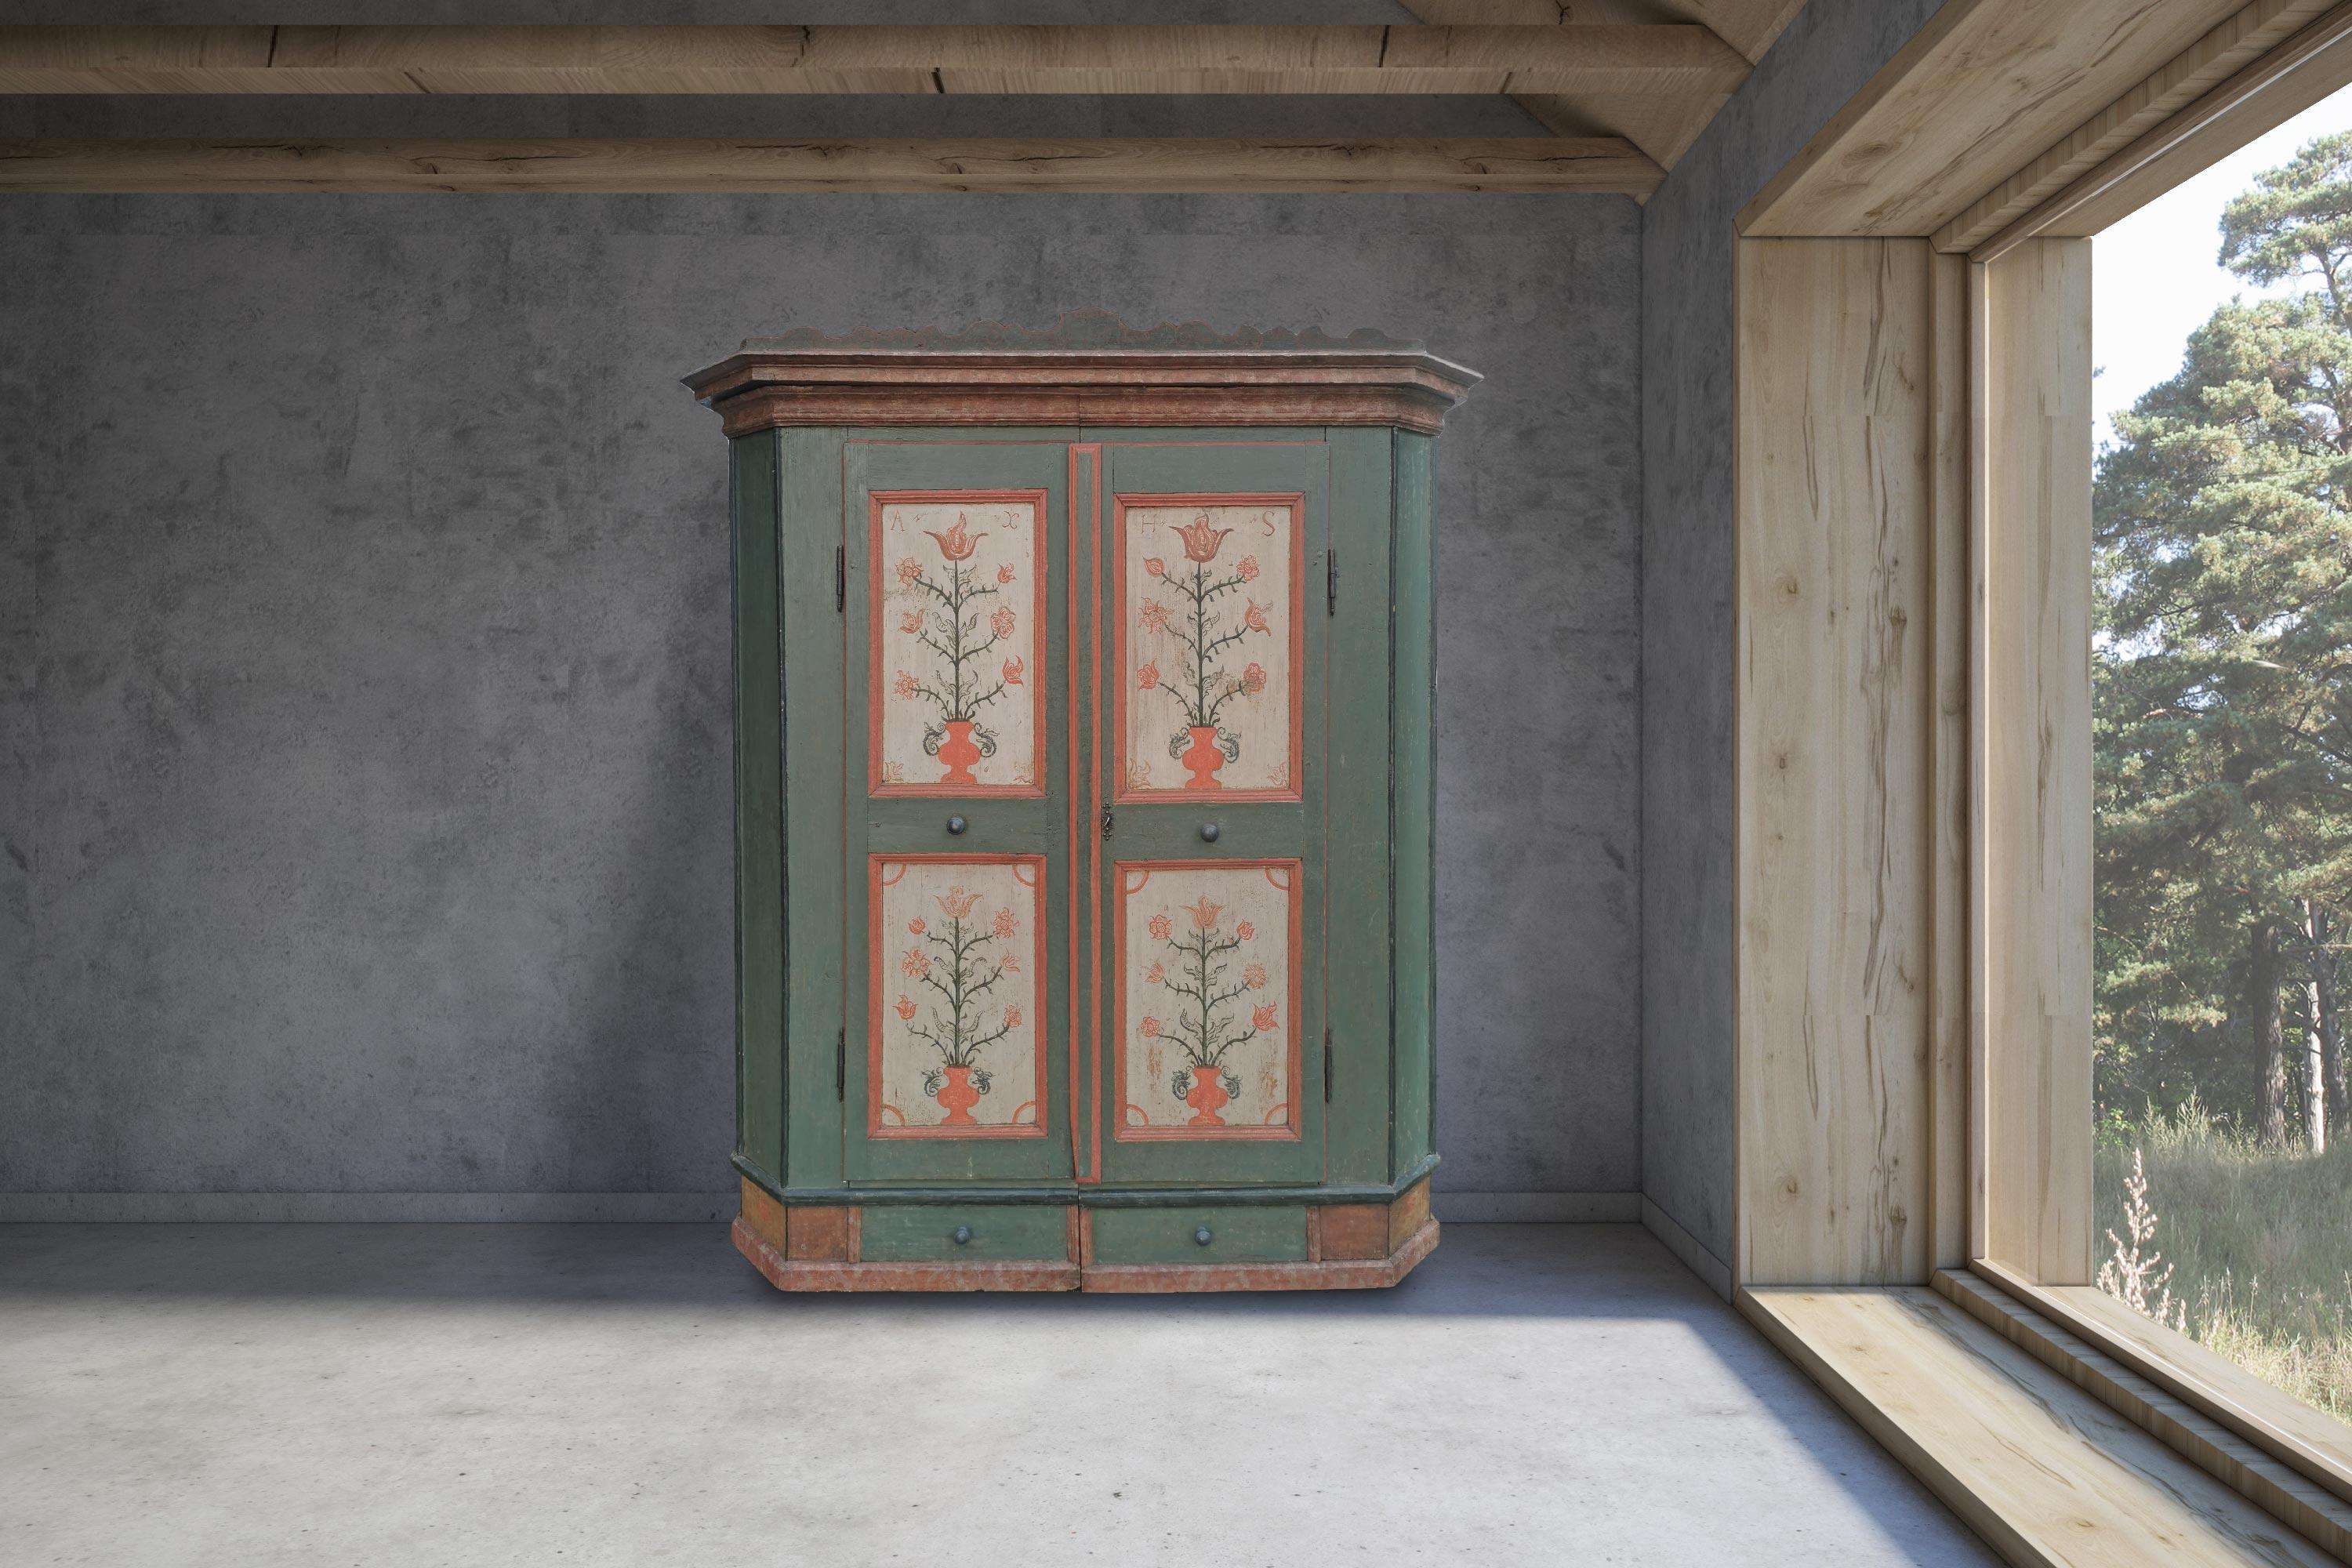 Green Tyrolean wardrobe dated 1782

H.185 – L.142 (160 at the frames) – P.50 (59 at the frames)

Tyrolean painted wardrobe with two doors, entirely painted in intense green.

On the doors, four ivory panels with red frames contain floral